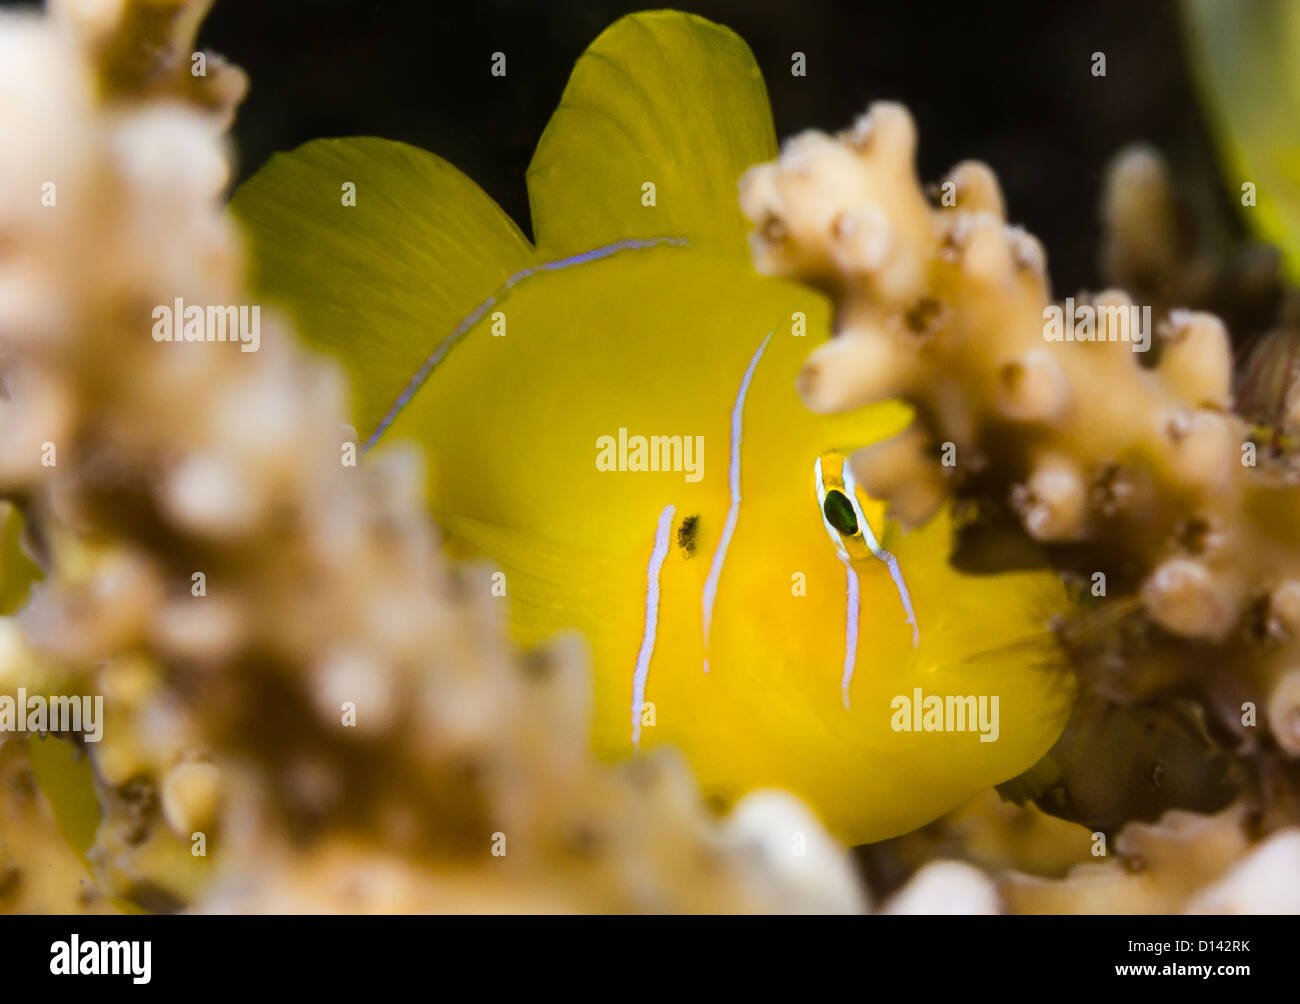 A shy Lemon Goby hides behind the protective branches of an Acropora table coral on a reef in the Red Sea Stock Photo